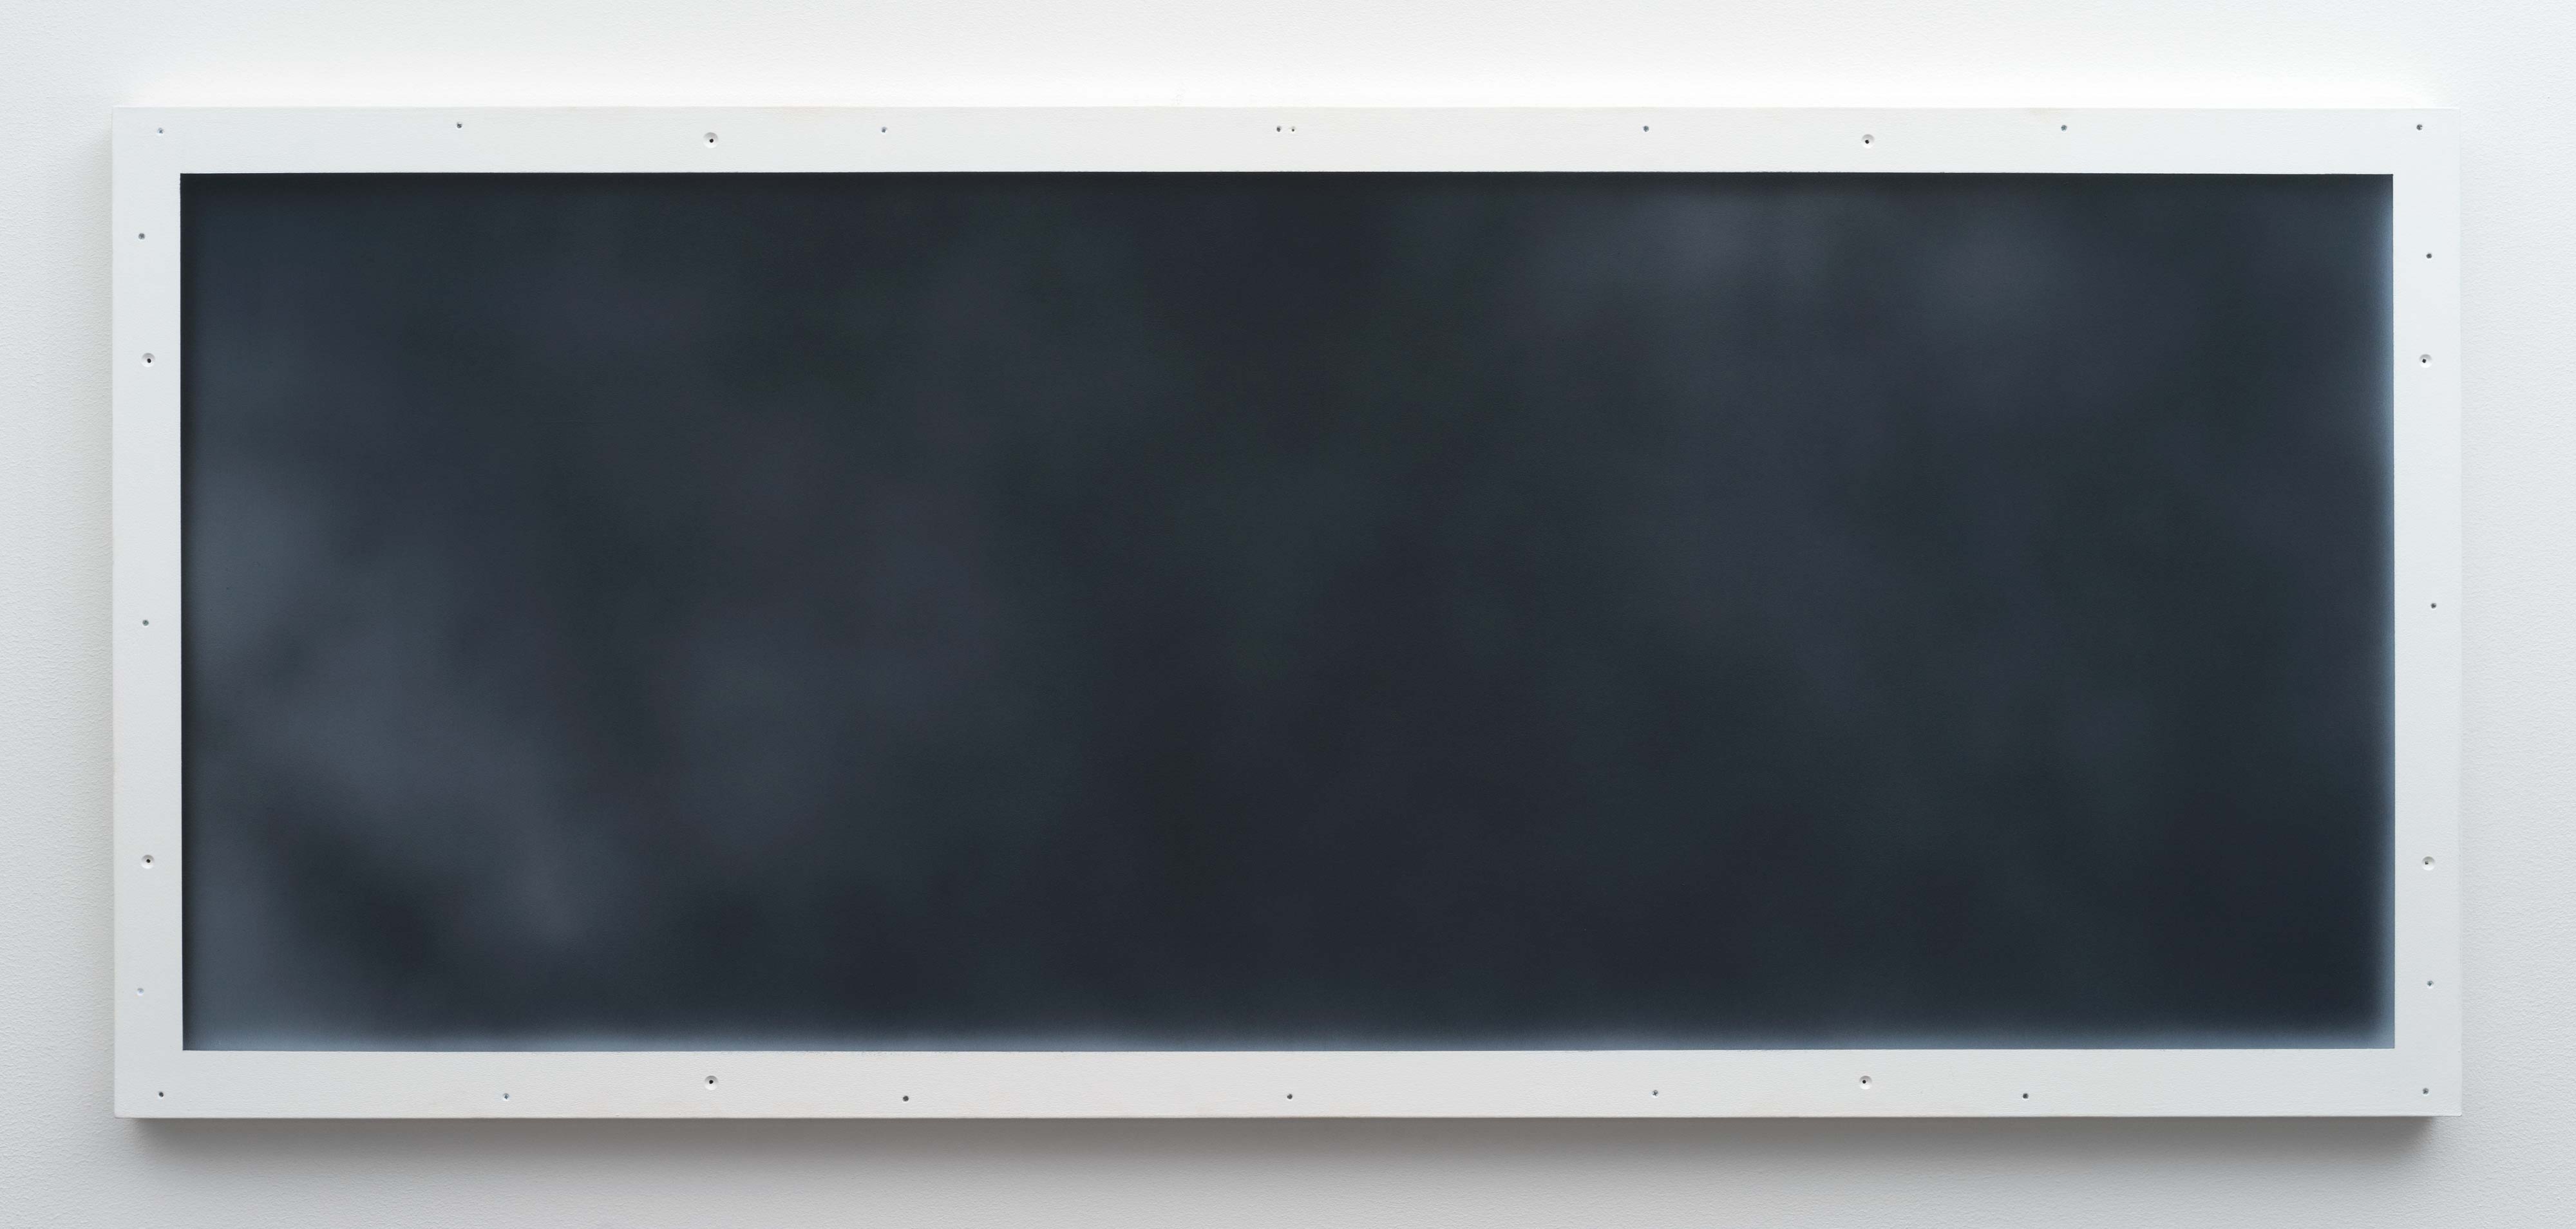 Christopher Page<br>Noctunre (IX)<br>2016<br>oil and acrylic on panel<br>23.6 x 54.3 in (60 x 138 cm)